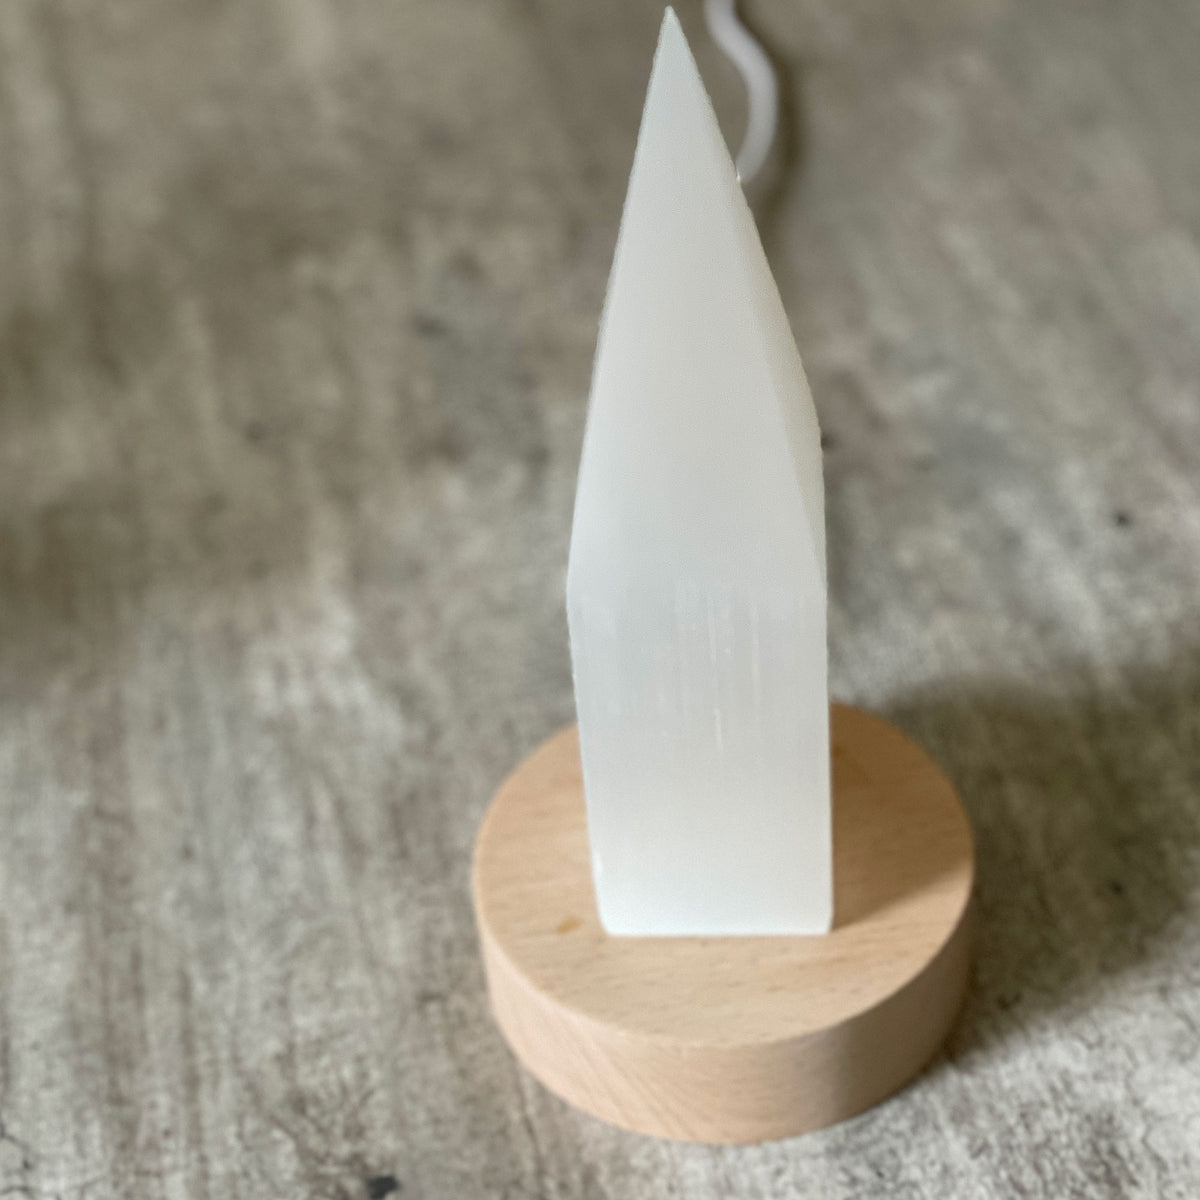 Selenite Lamp - Pencil Point Small - Selenite is a beautiful and versatile crystal that offers numerous benefits, making it a popular choice for both decor and holistic purposes. Its natural beauty and unique translucent appearance make it an eye-catching addition to any home. Selenite emits a soft and warm glow, which makes it an excellent choice for a night light.